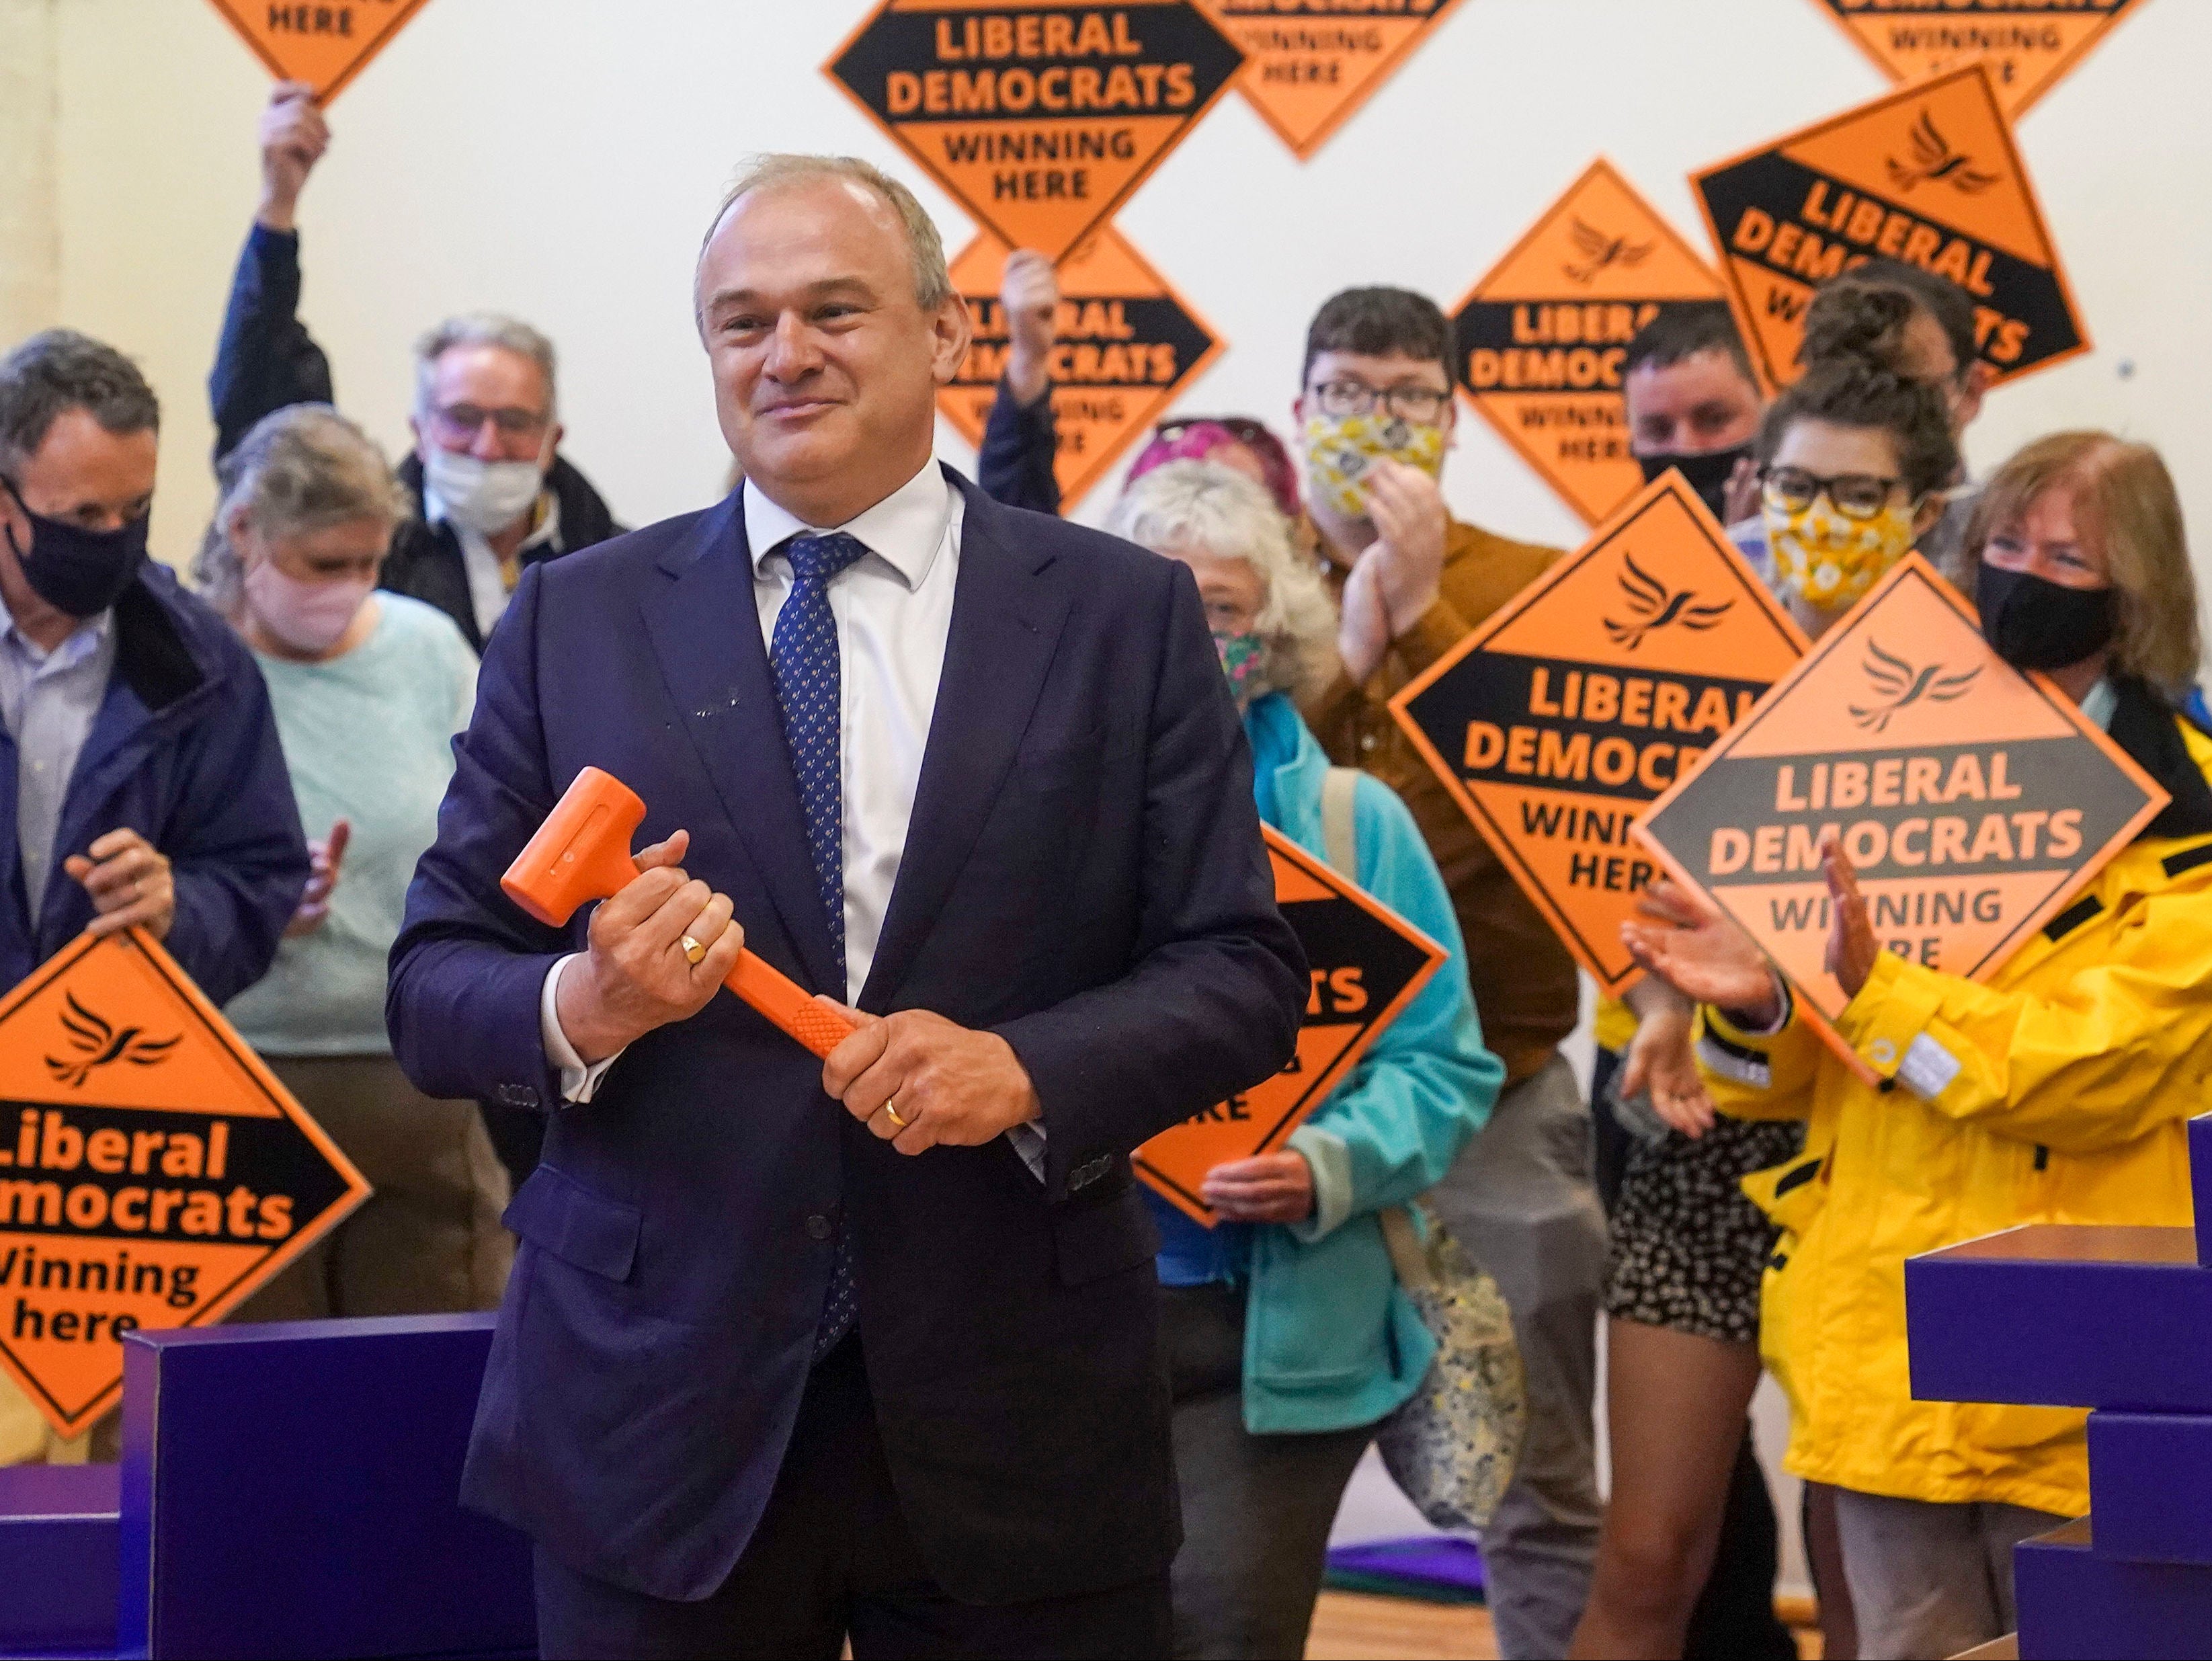 A good night for the Lib Dems and its leader Ed Davey